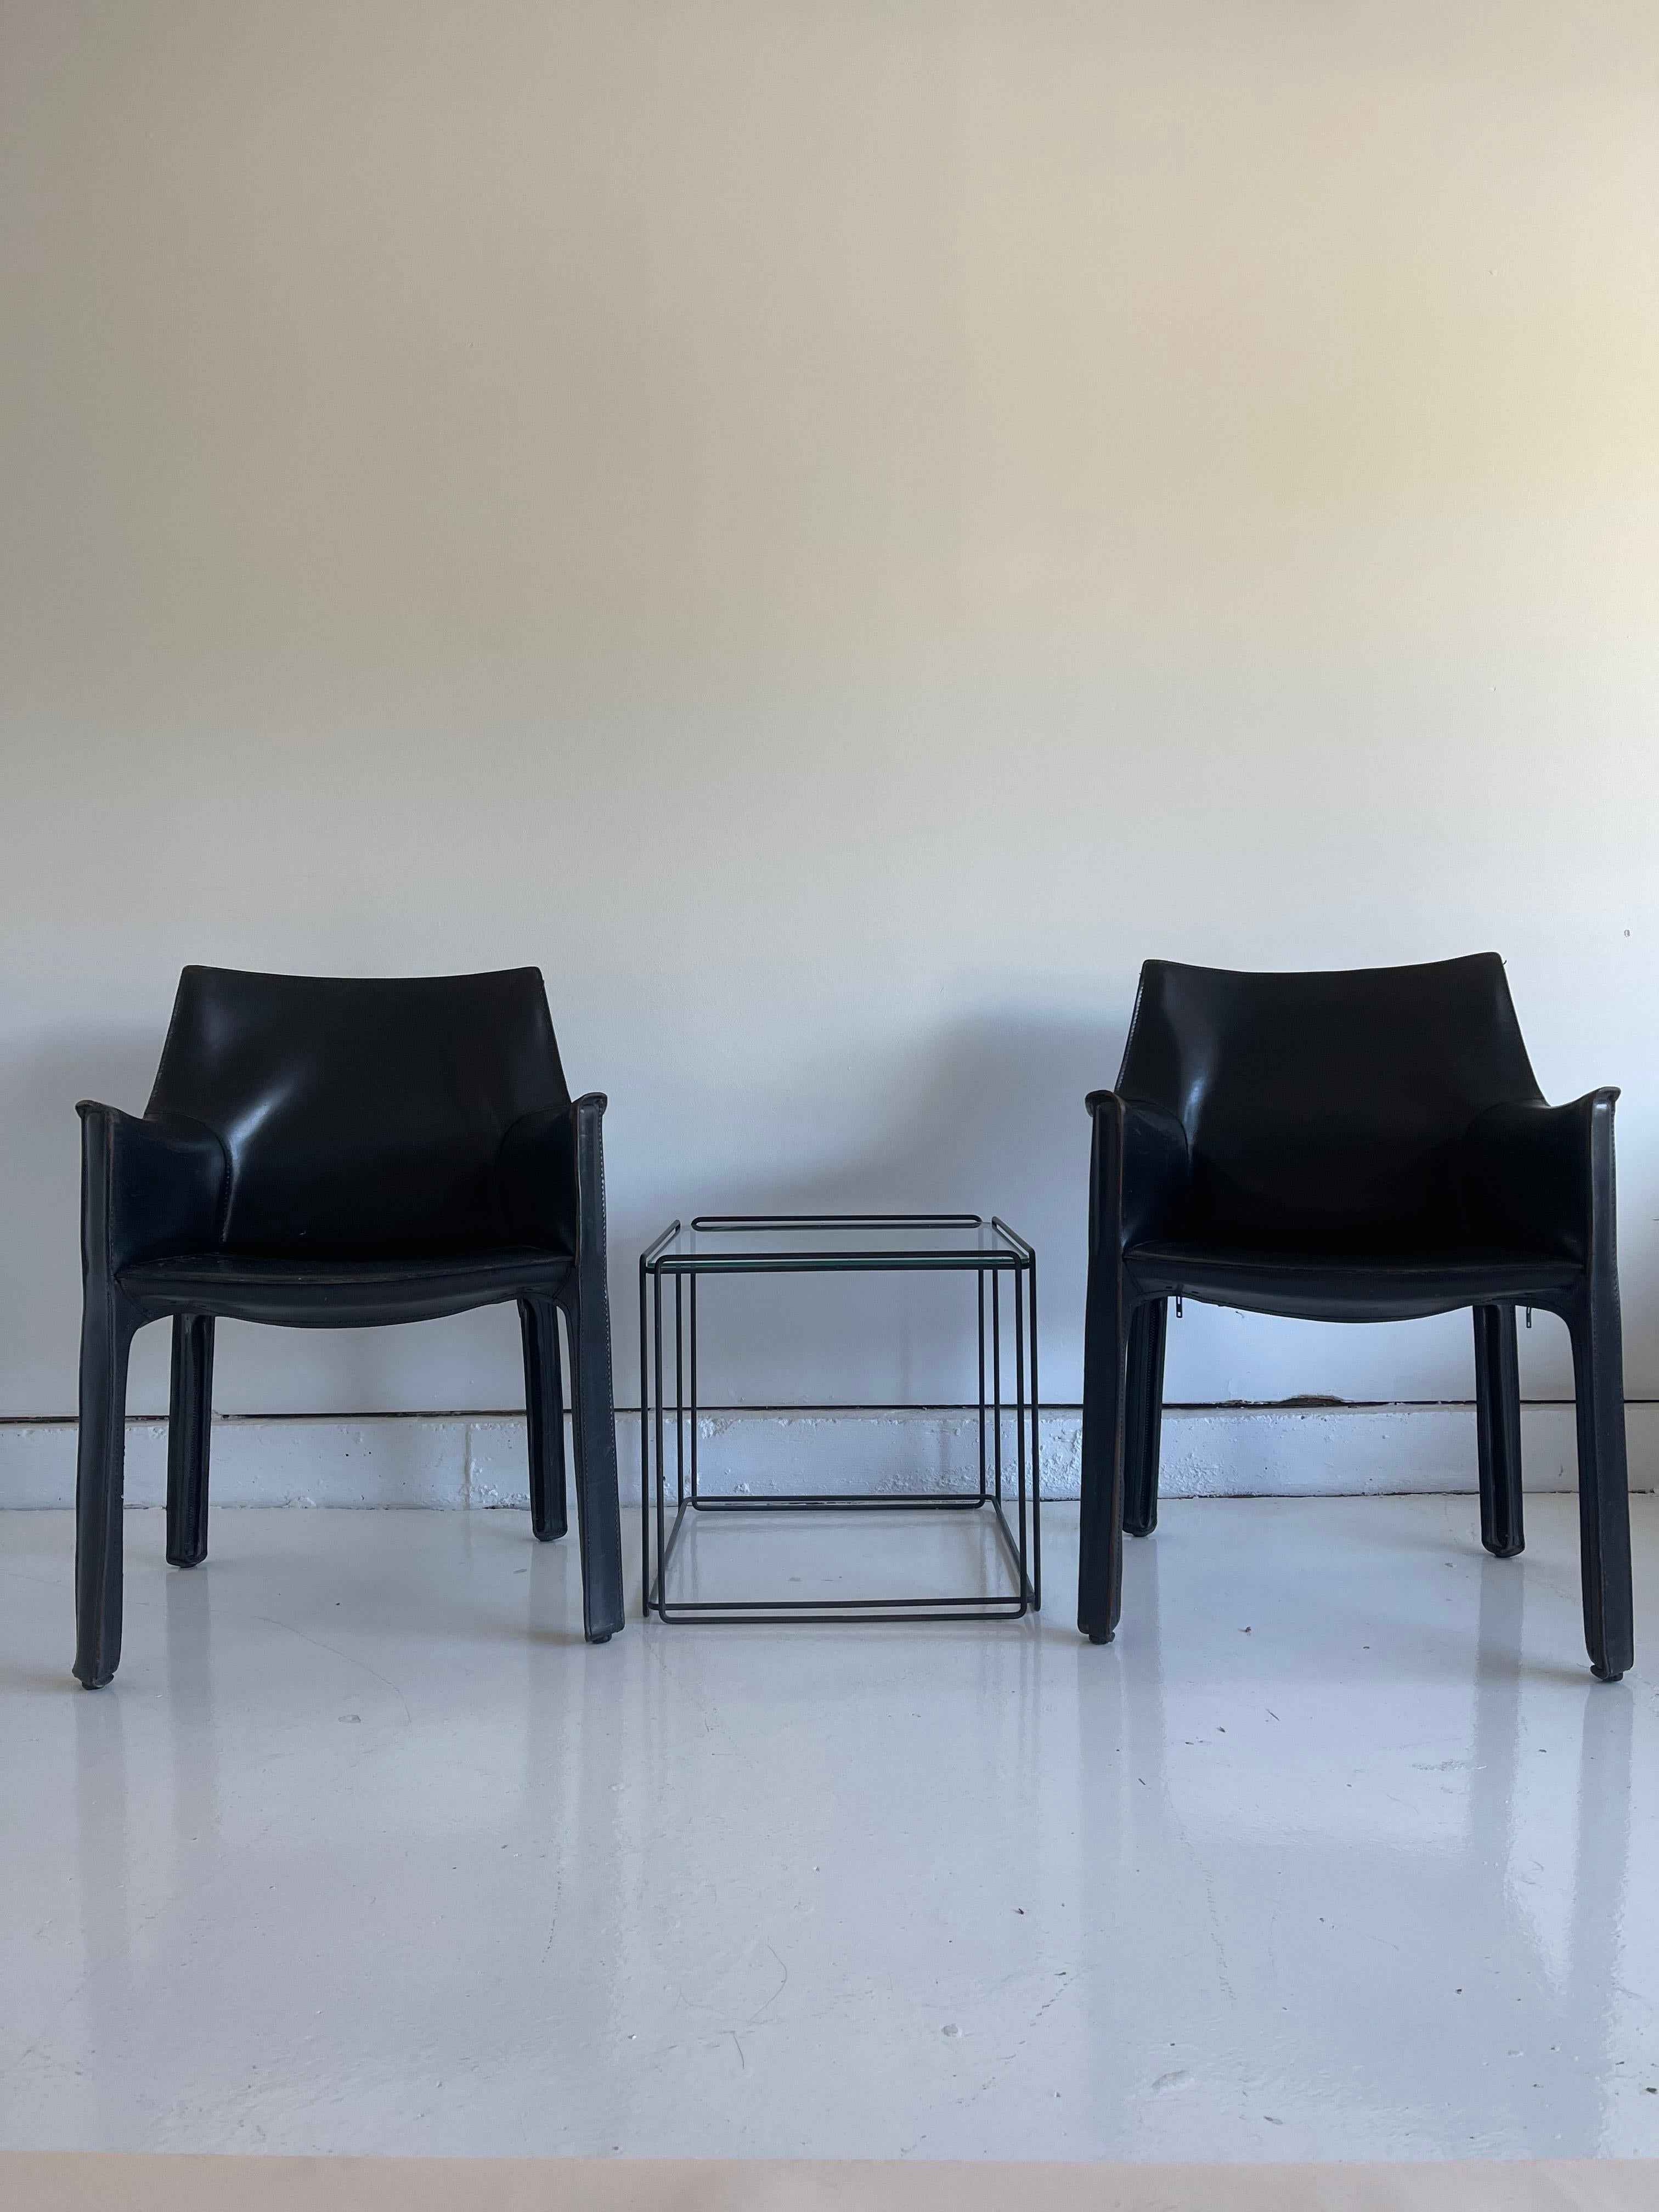 Pair of Max Sauze Isosceles tables for Arrow, France 1970s. Black metal wire-frame with glass inserts. Striking minimalist design works with any decor.